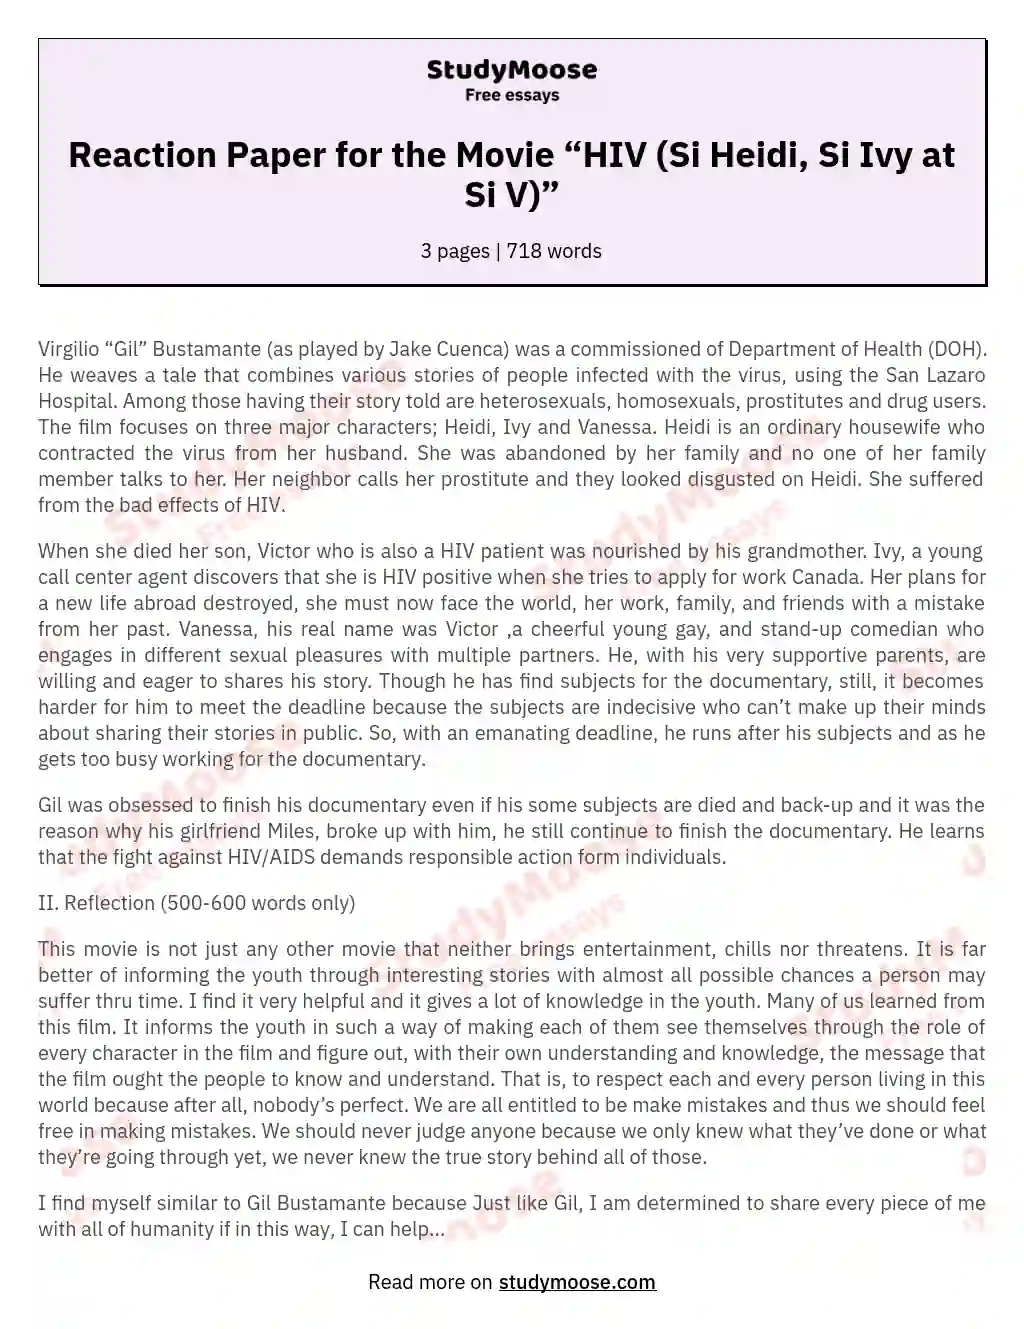 Reaction Paper for the Movie “HIV (Si Heidi, Si Ivy at Si V)” essay